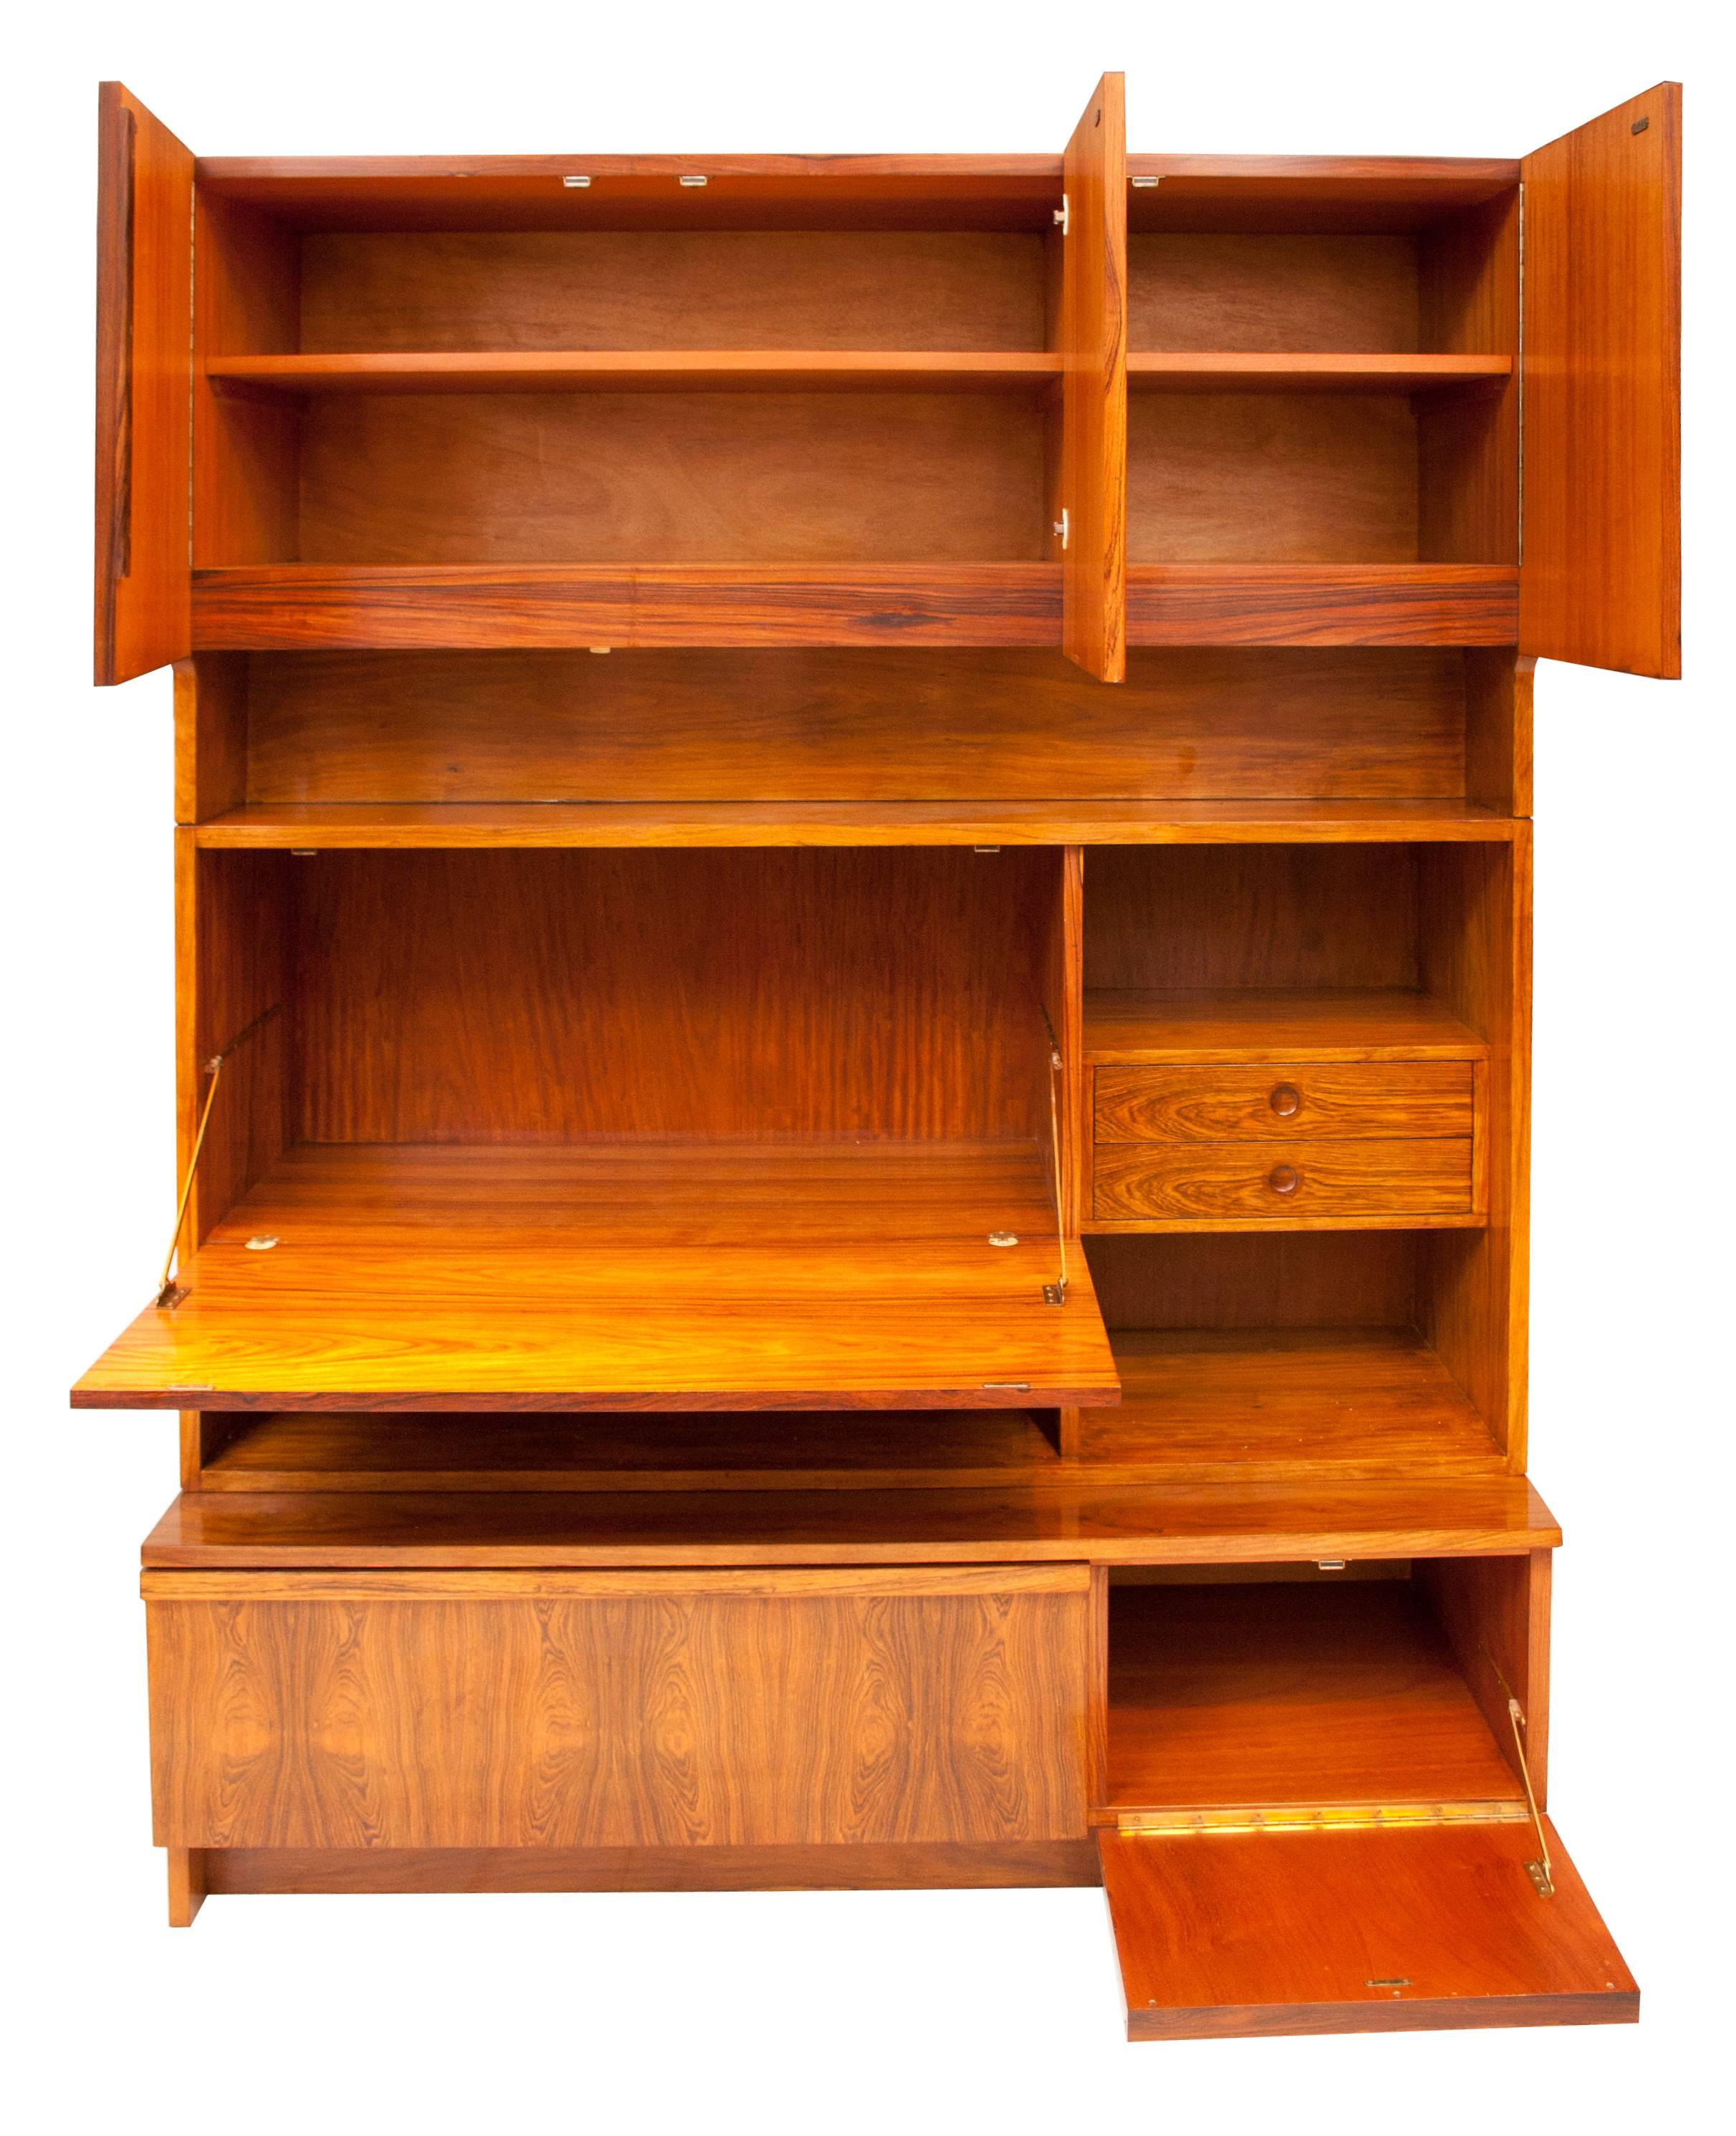 1960s-1970s rosewood unit designed by Robert Heritage for Archie Shine.
 